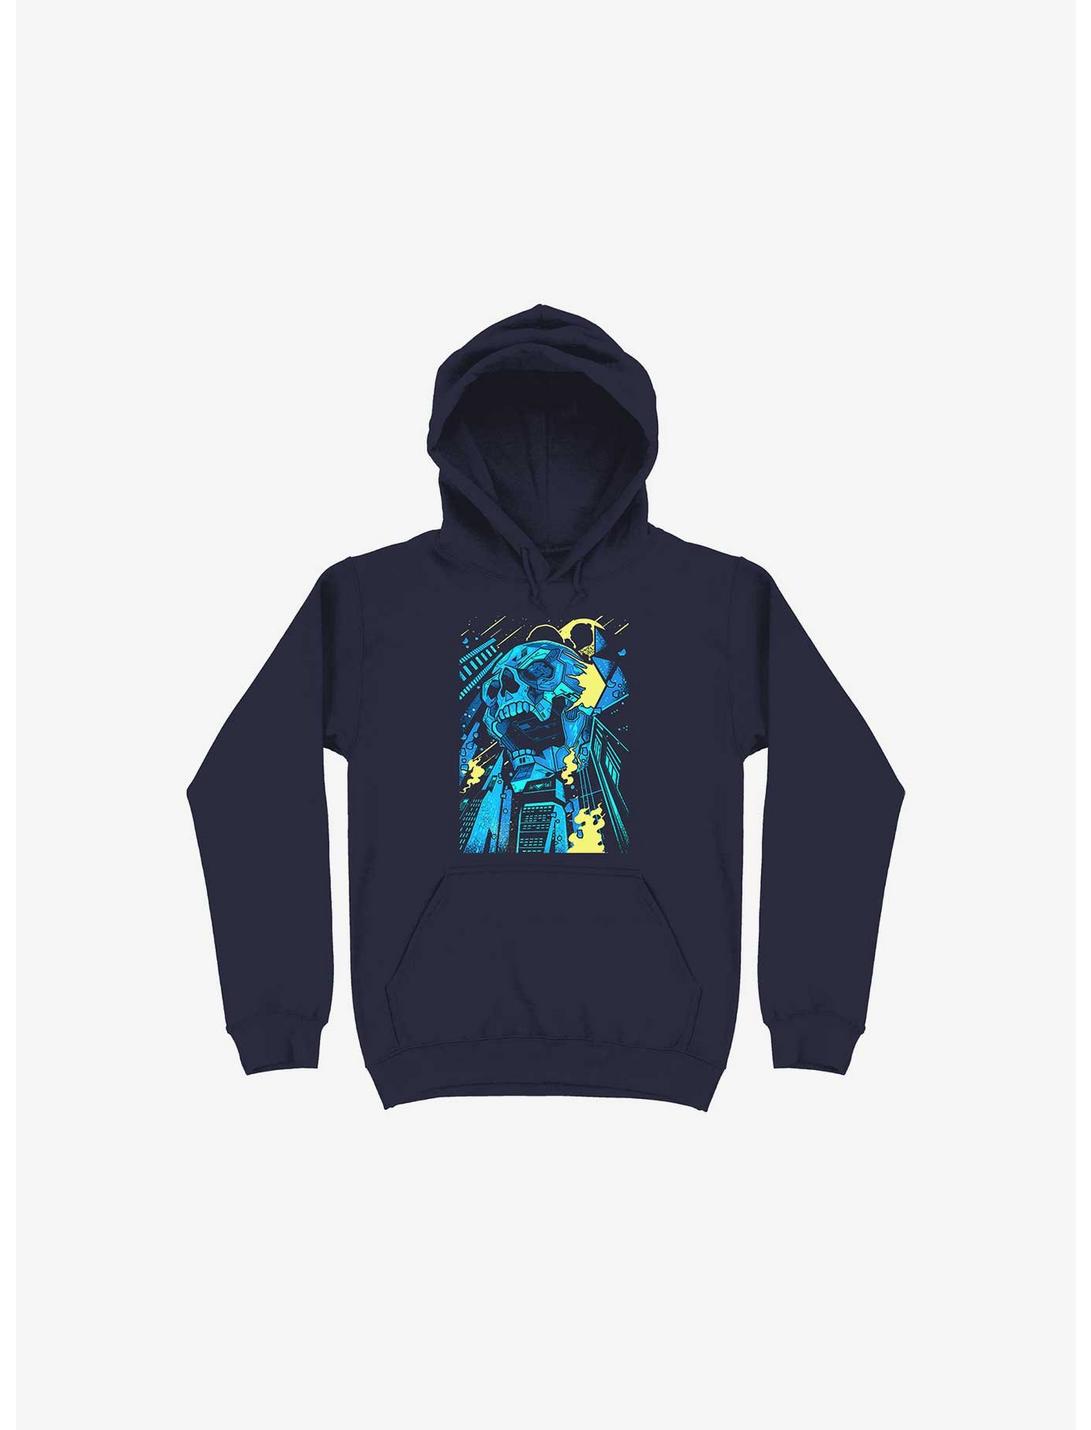 Invasion Of The Giant Techno Skulls Navy Blue Hoodie, NAVY, hi-res